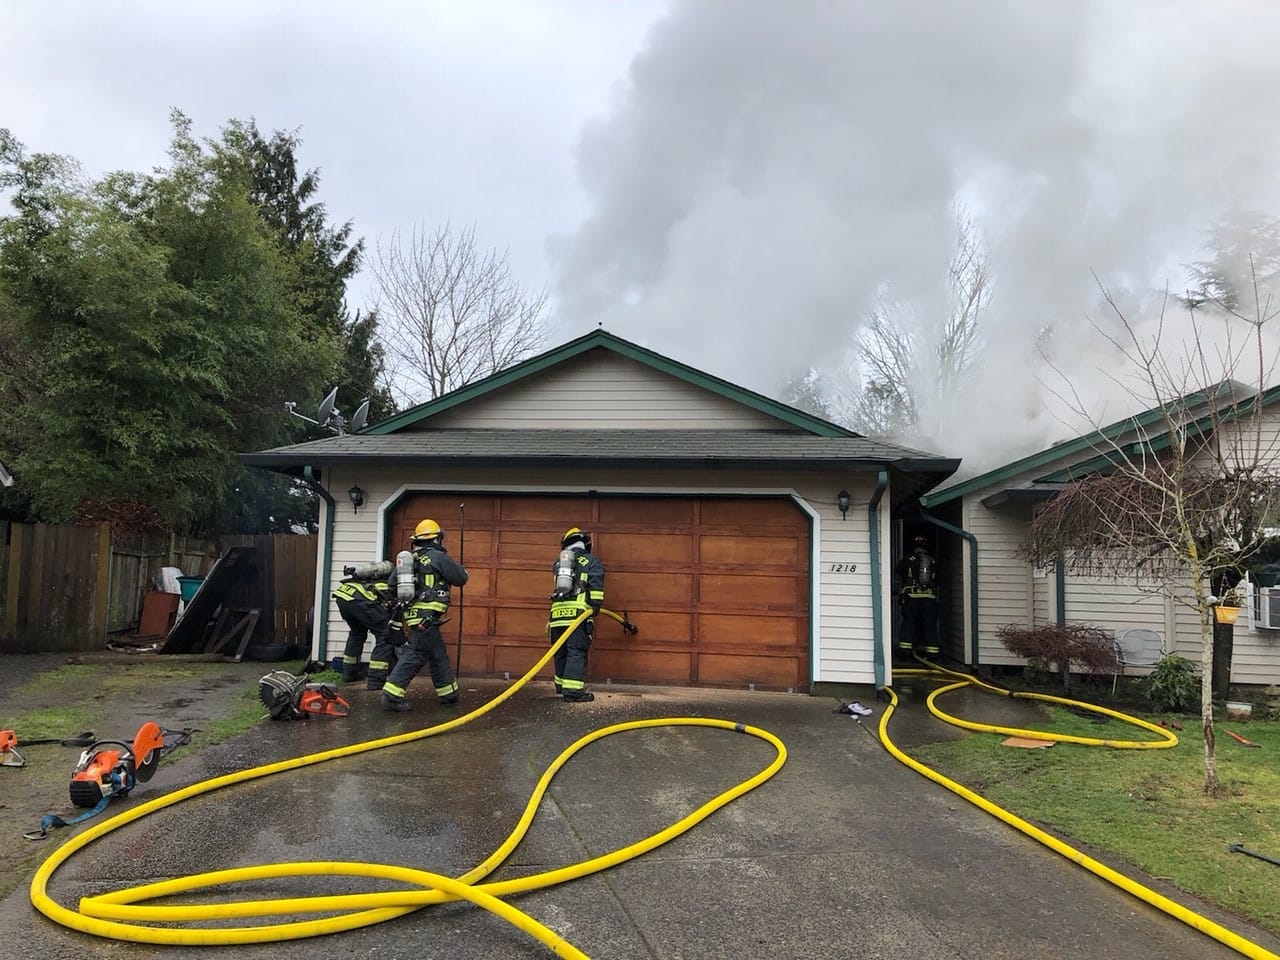 Vancouver firefighters were dispatched at 11:20 a.m. Thursday to the 1200 block of Southeast Park Crest Avenue for the report of a residential structure fire. Four people were displaced.